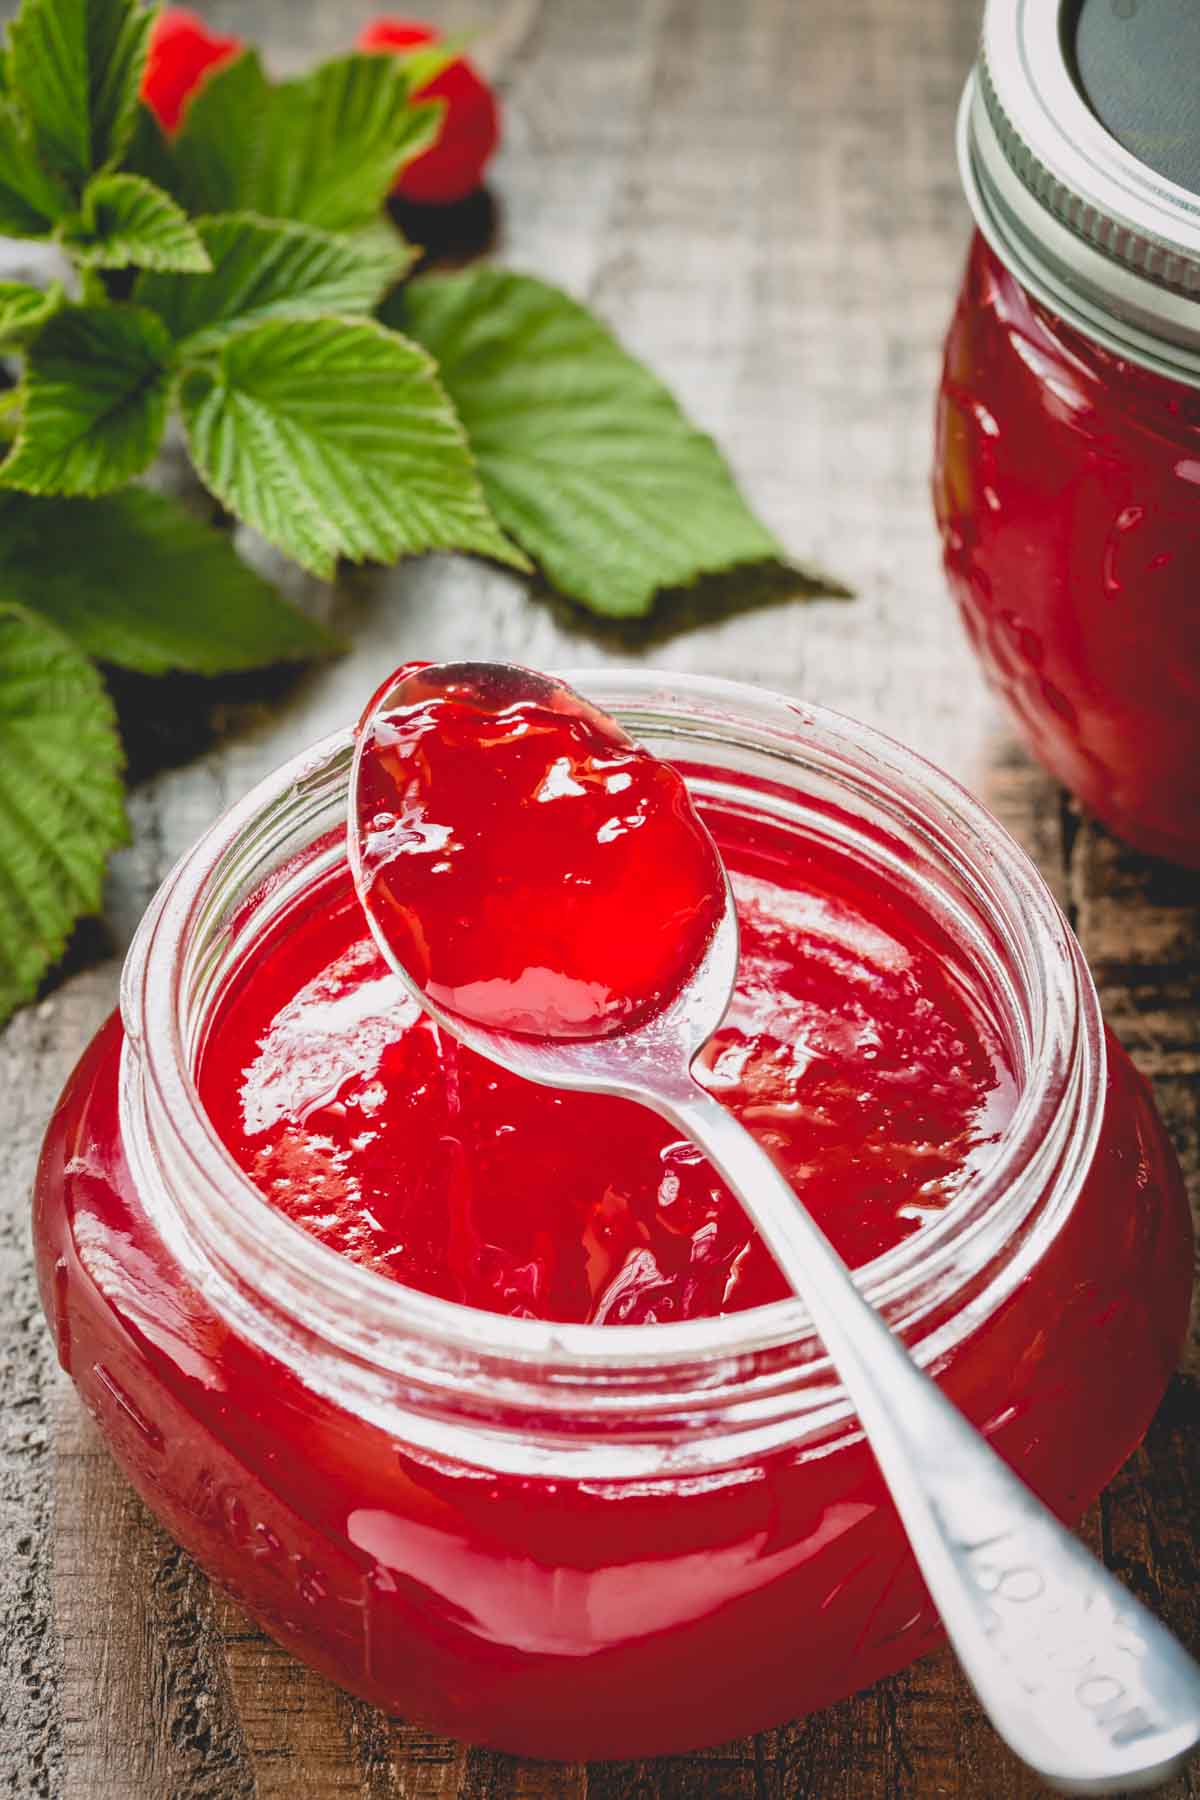 Raspberry jelly in a wide mouth glass jar with spoonful of jelly rested on the jar.